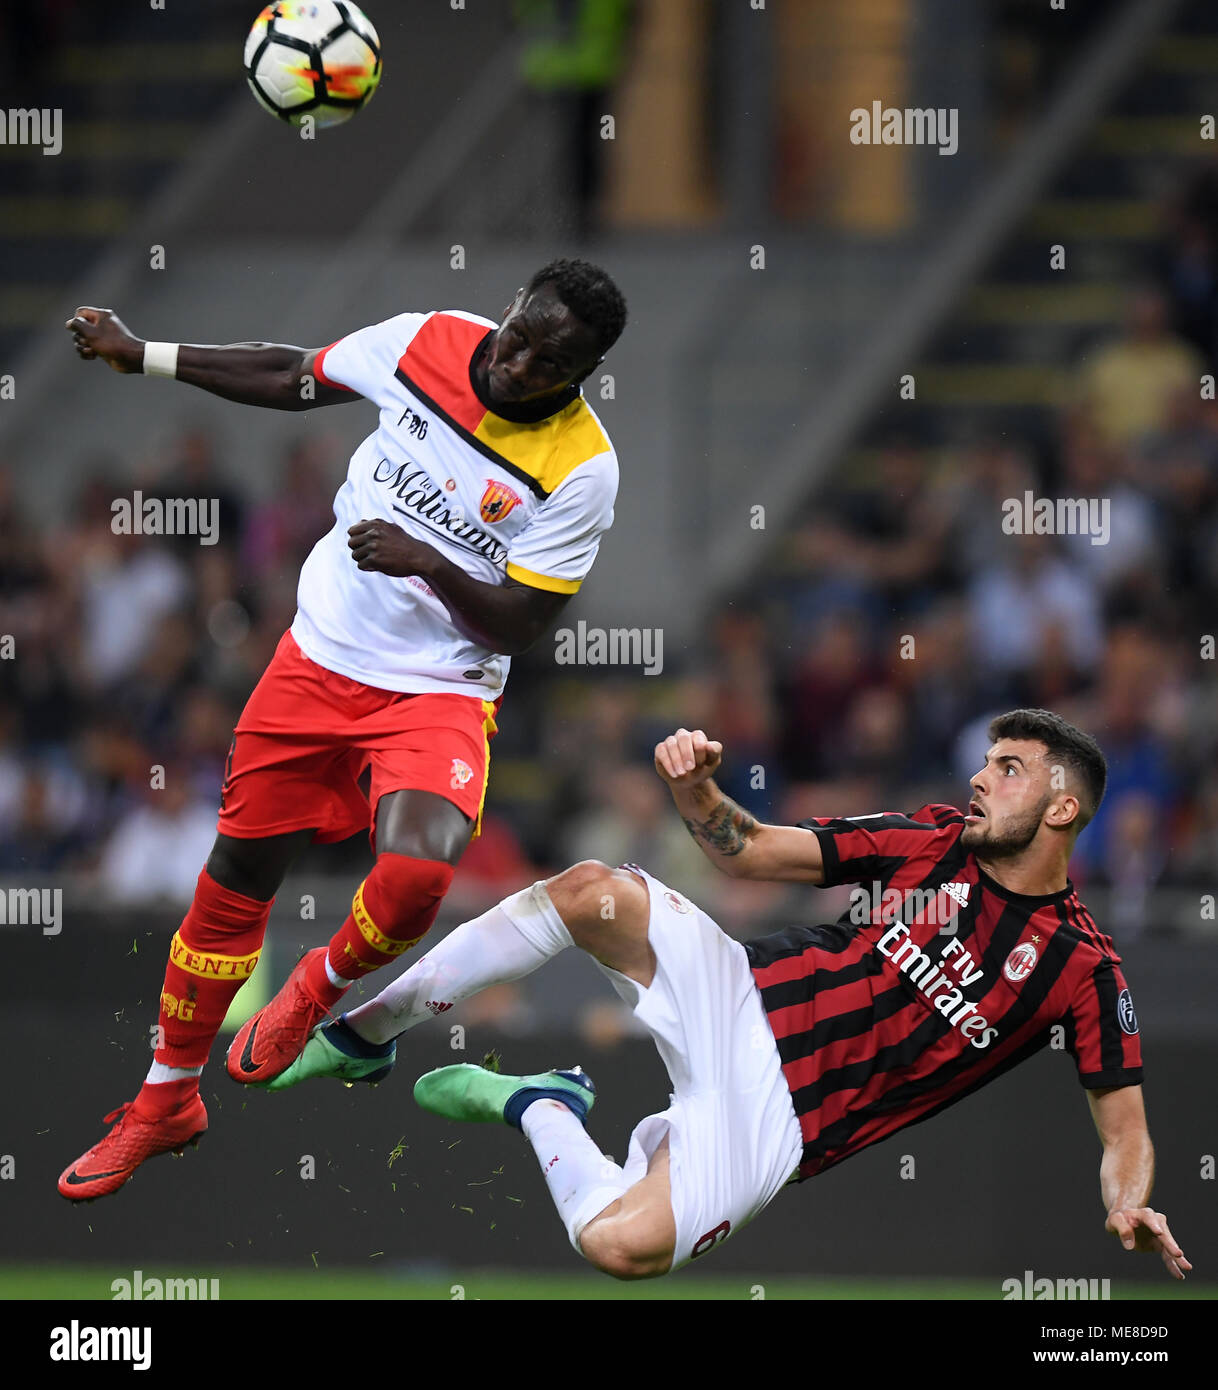 Milan, Italy. 21st Apr, 2018. Benevento's Bacary Sagna (L) vies with AC Milan's Patrick Cutrone during the Serie A soccer match between AC Milan and Benevento in Milan, Italy, on April 21, 2018. Benevento won 1-0. Credit: Alberto Lingria/Xinhua/Alamy Live News Stock Photo